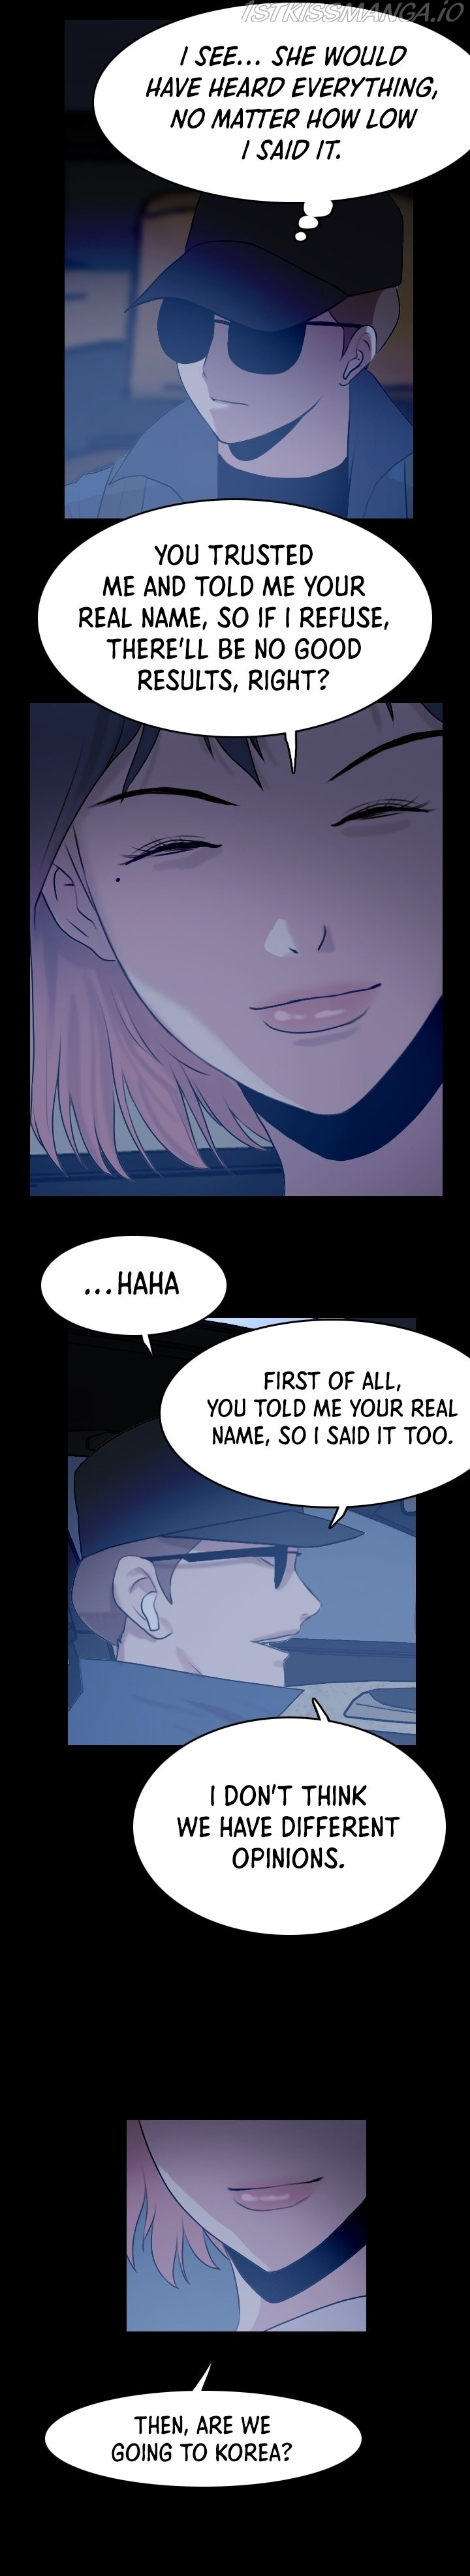 I Picked A Mobile From Another World - Page 2